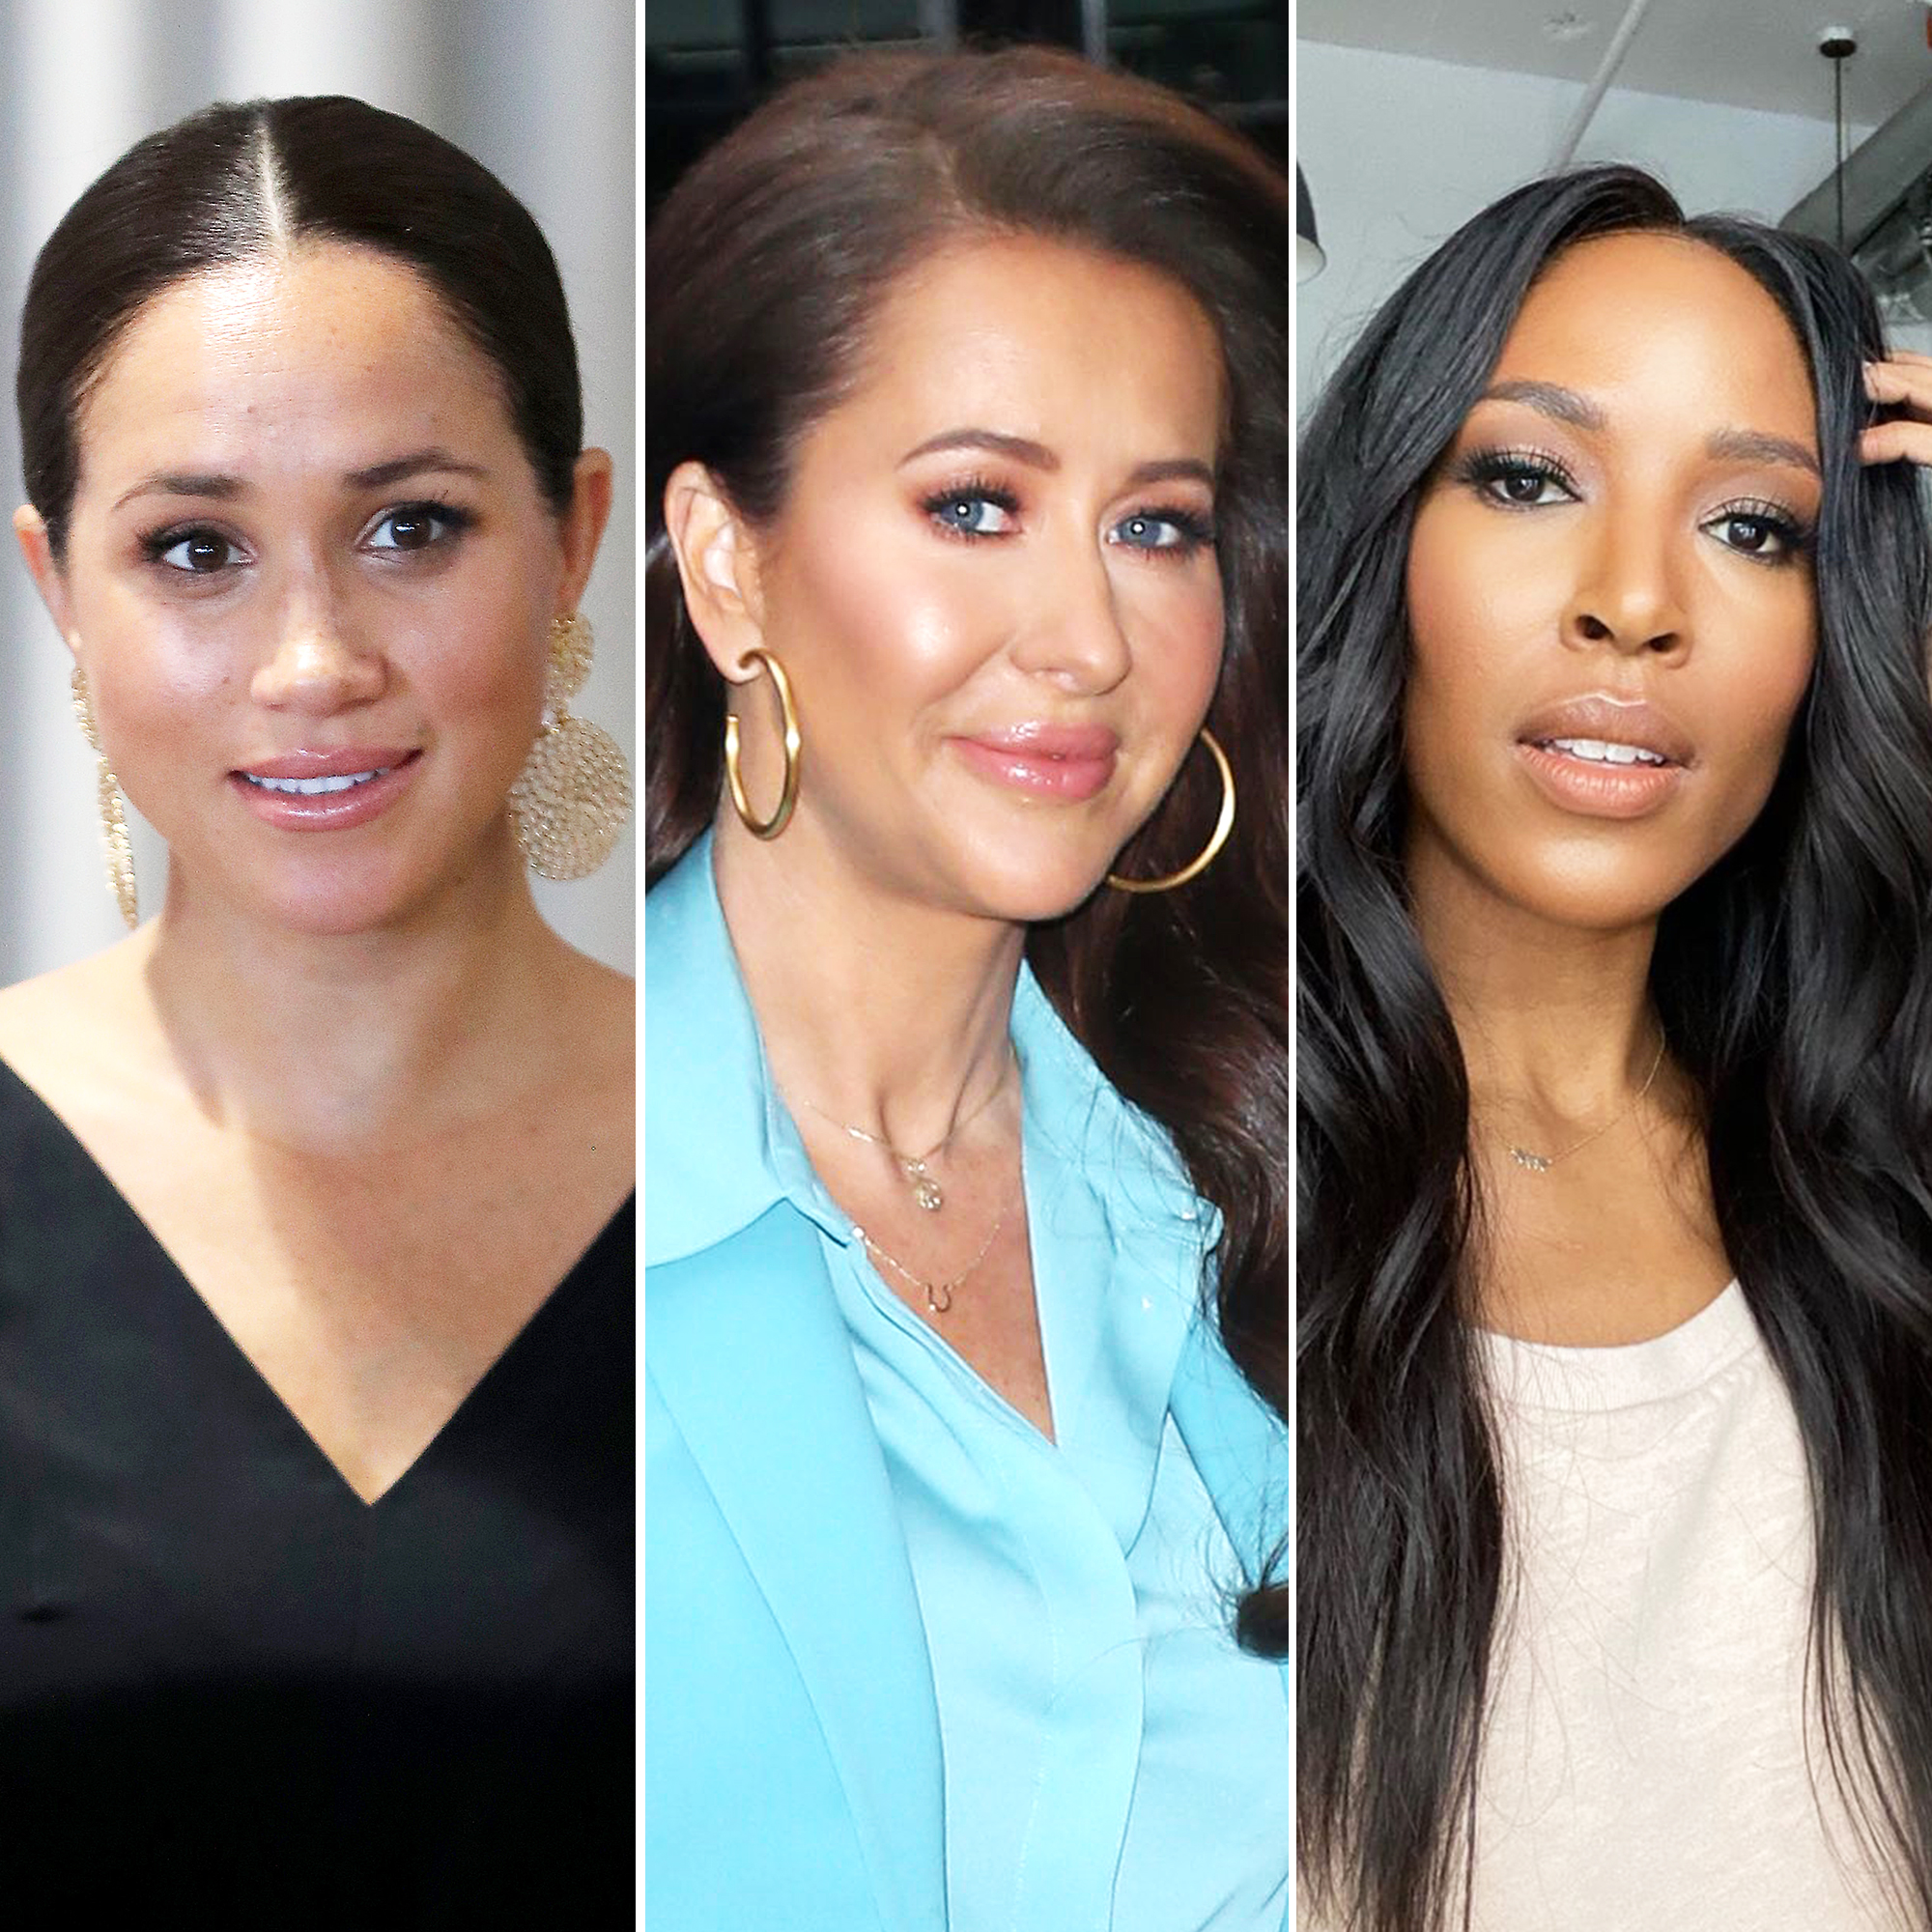 Meghan Markle Friend Jessica Mulroney Gets Dropped by Good Morning America After Sasha Exeter Fight